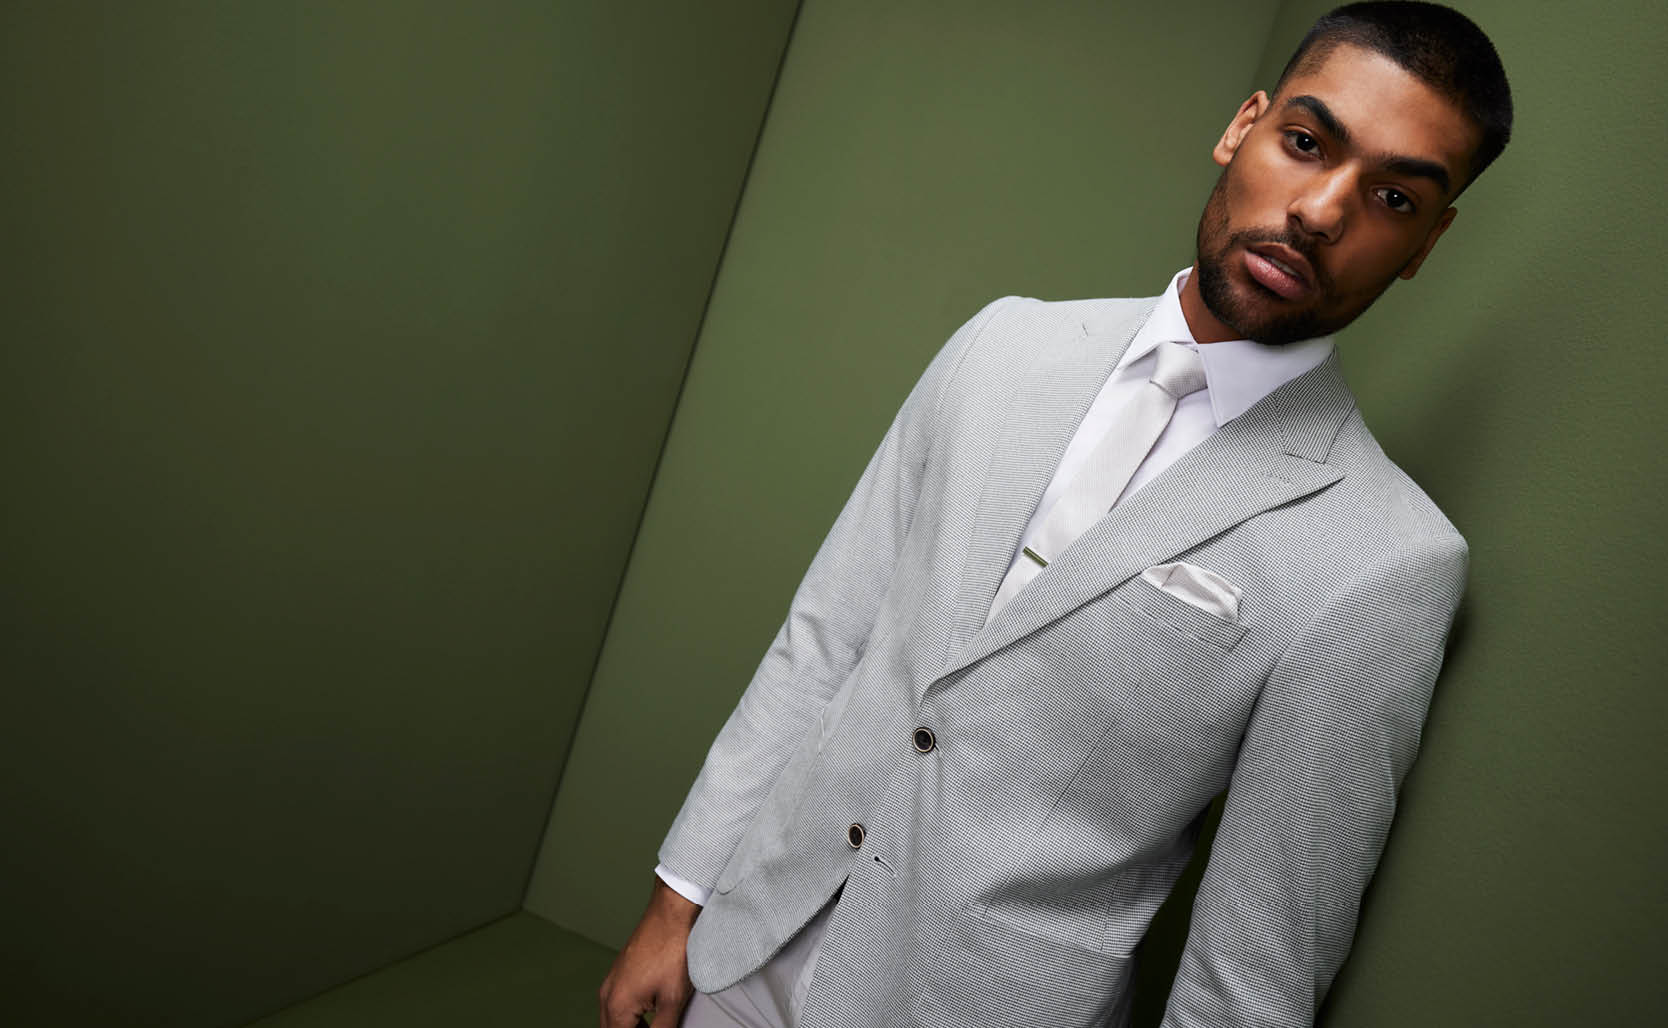 Male model wearing POLITIX light grey suit and white accessories standing in front of dark green backdrop